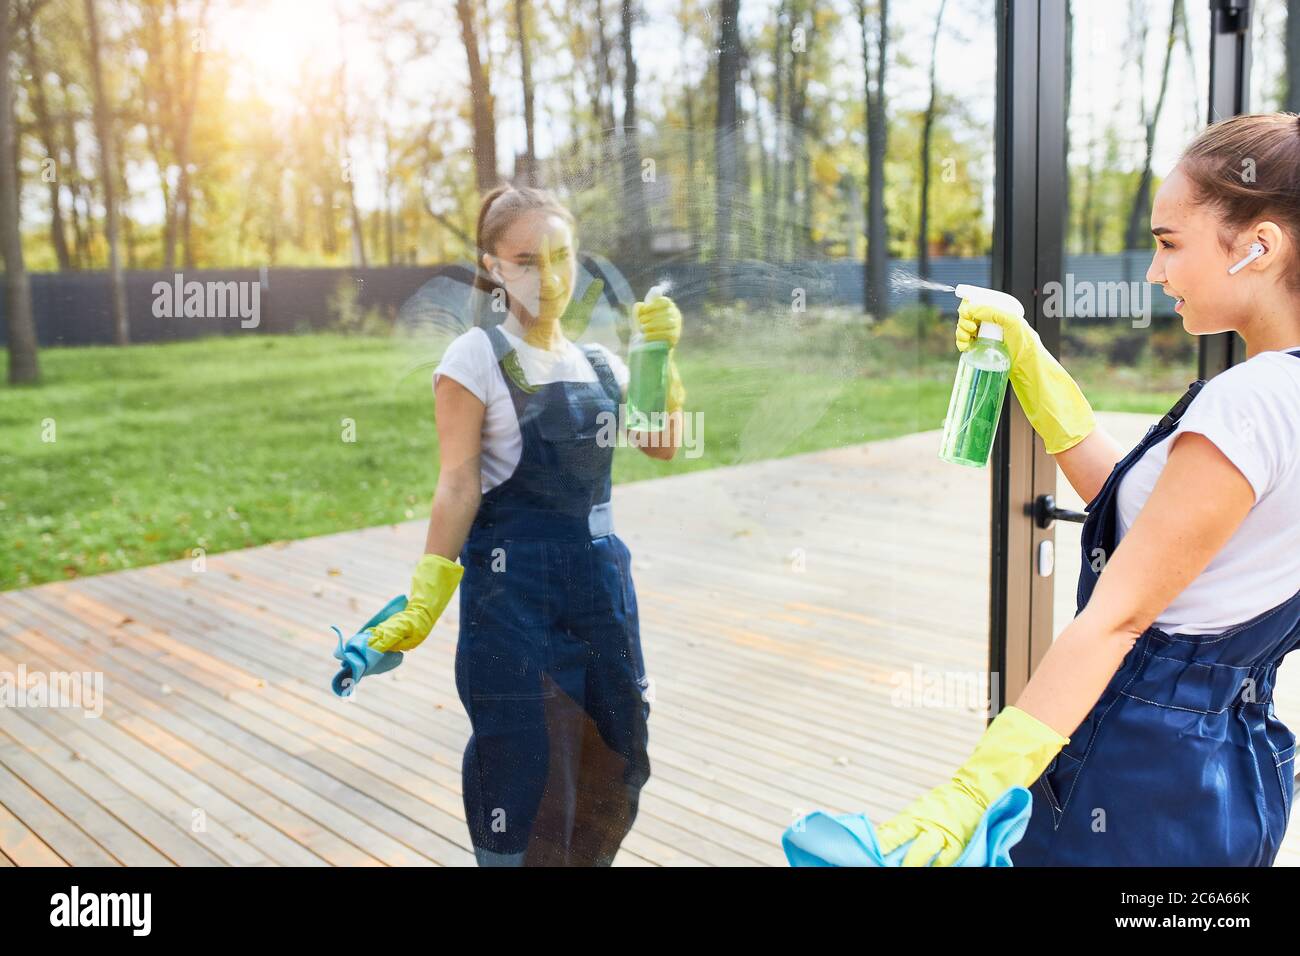 CLeaning service girl in uniform wearing yellow protective gloves washing window outdoors, look at reflection of herself in glass Stock Photo